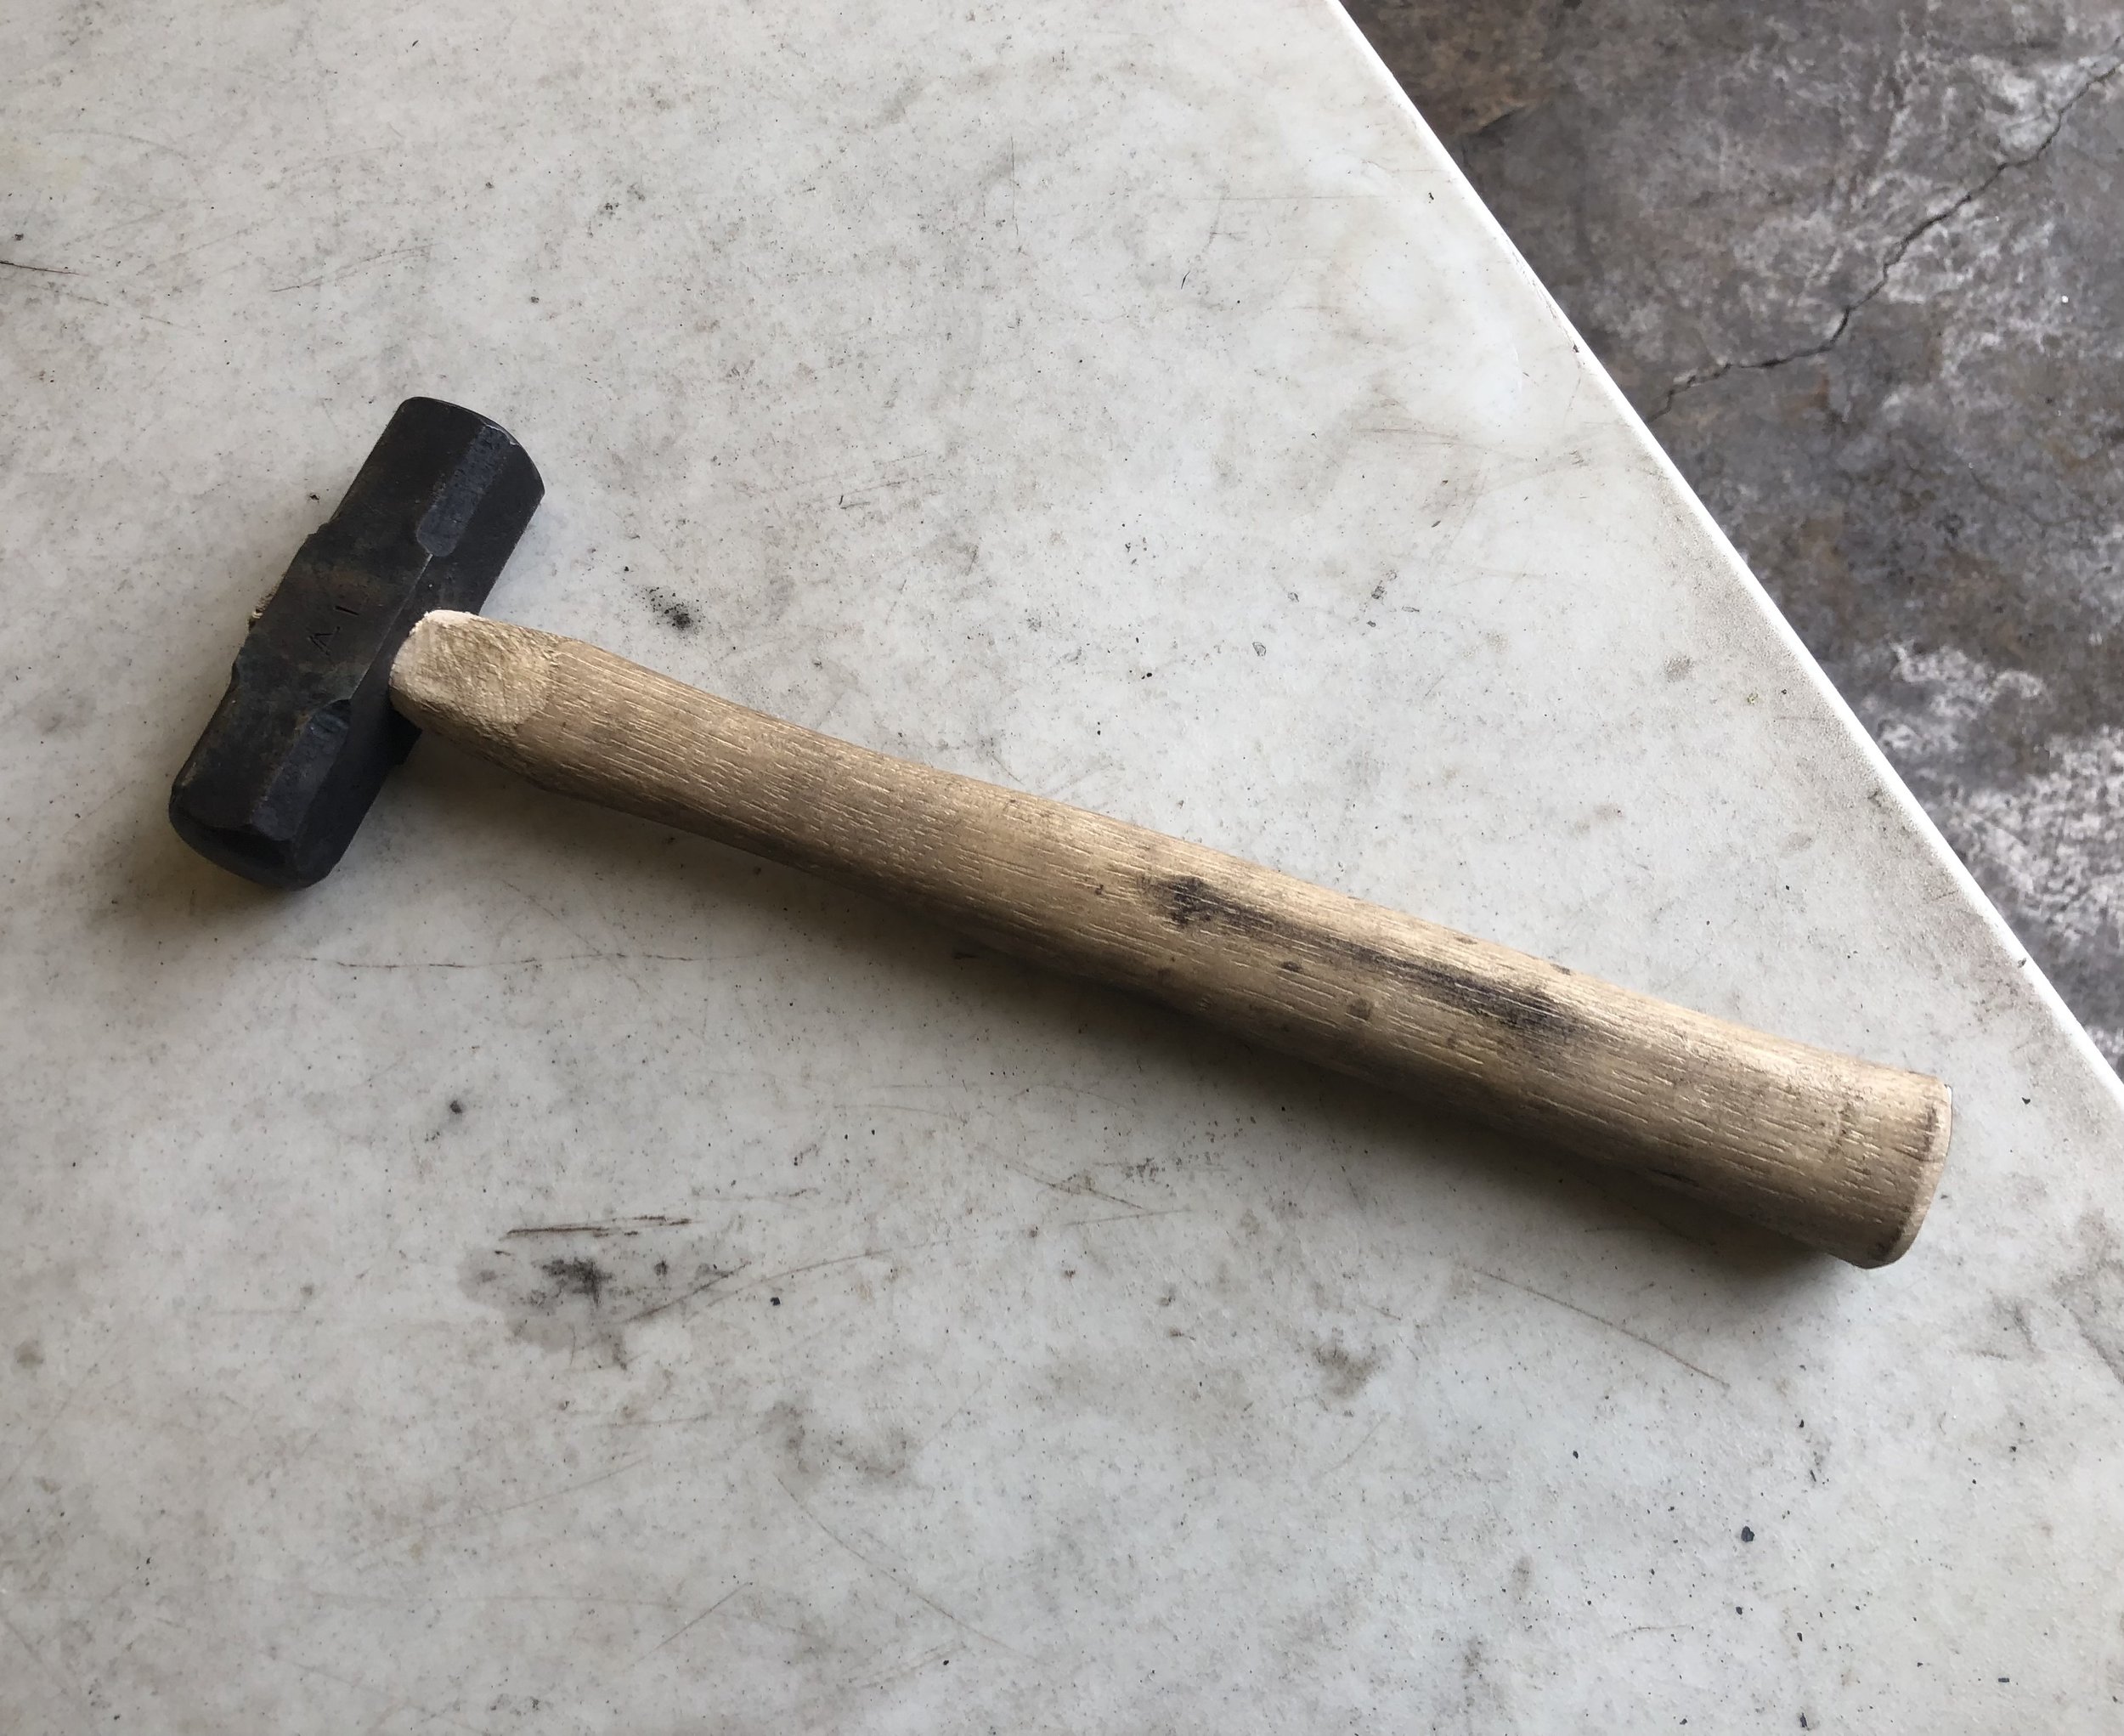  Blacksmithing hammer, 2022. Hand forged tool steel and hickory handle. 